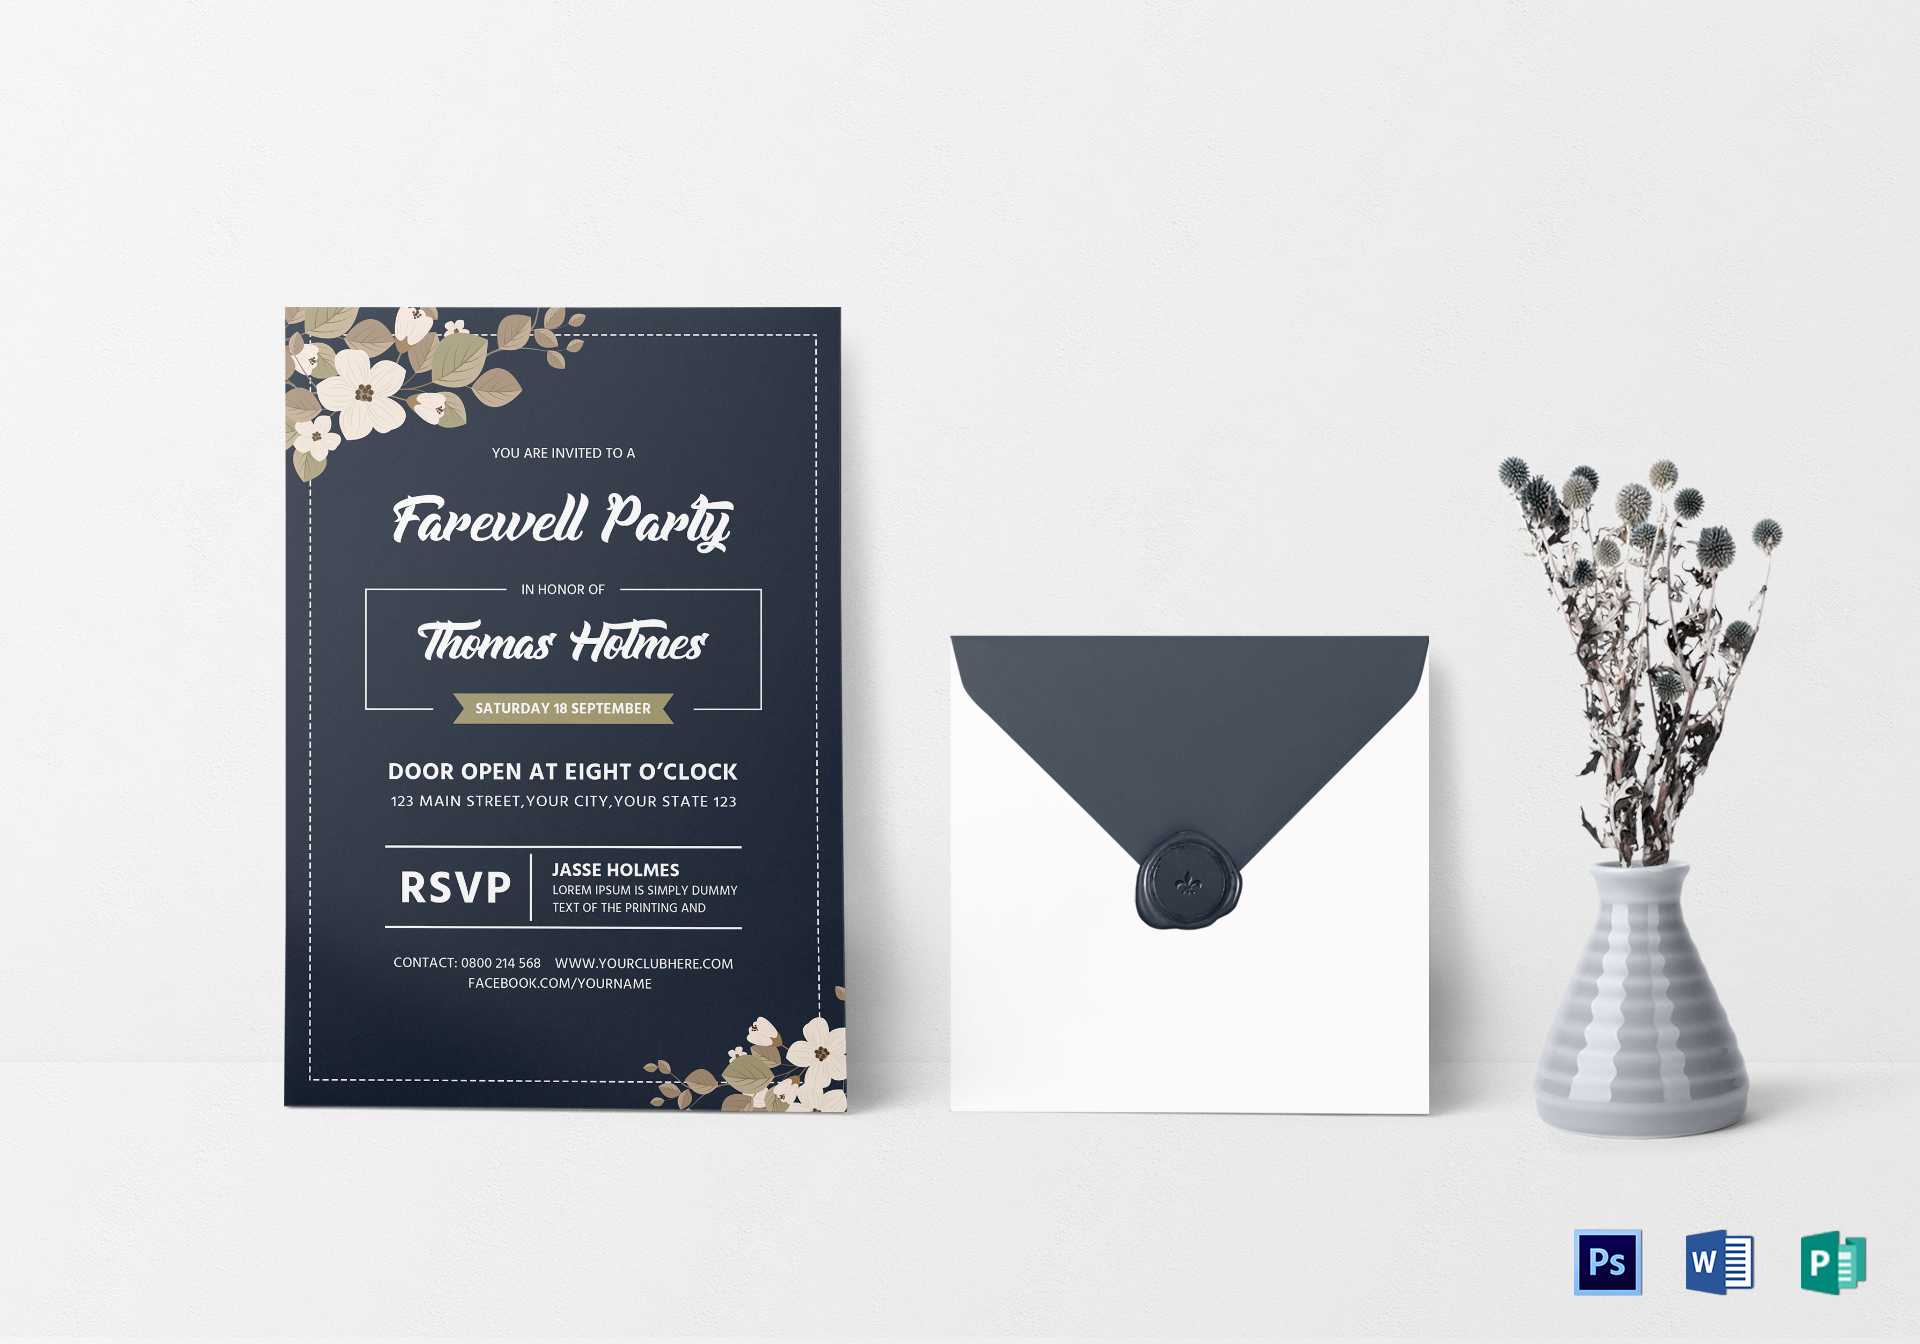 Farewell Party Invitation Card Template Intended For Farewell Invitation Card Template